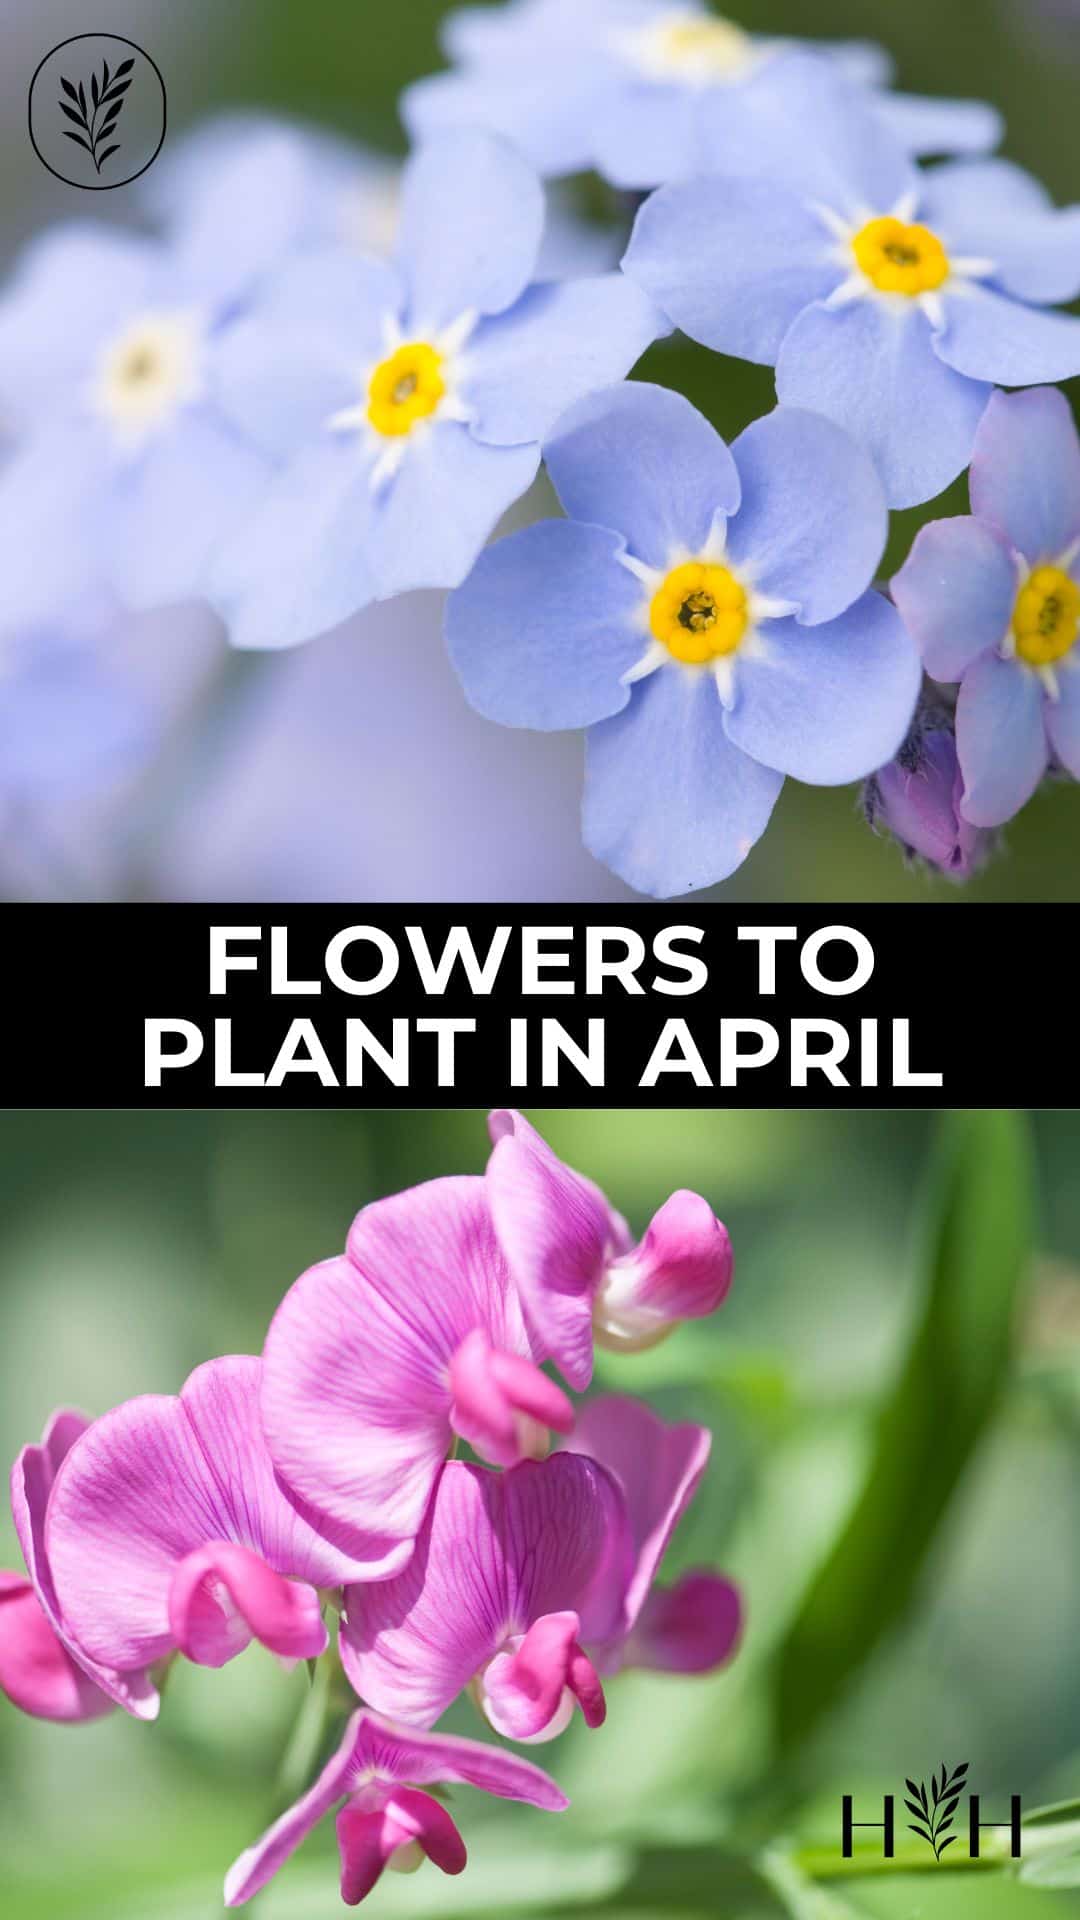 Flowers to plant in april via @home4theharvest